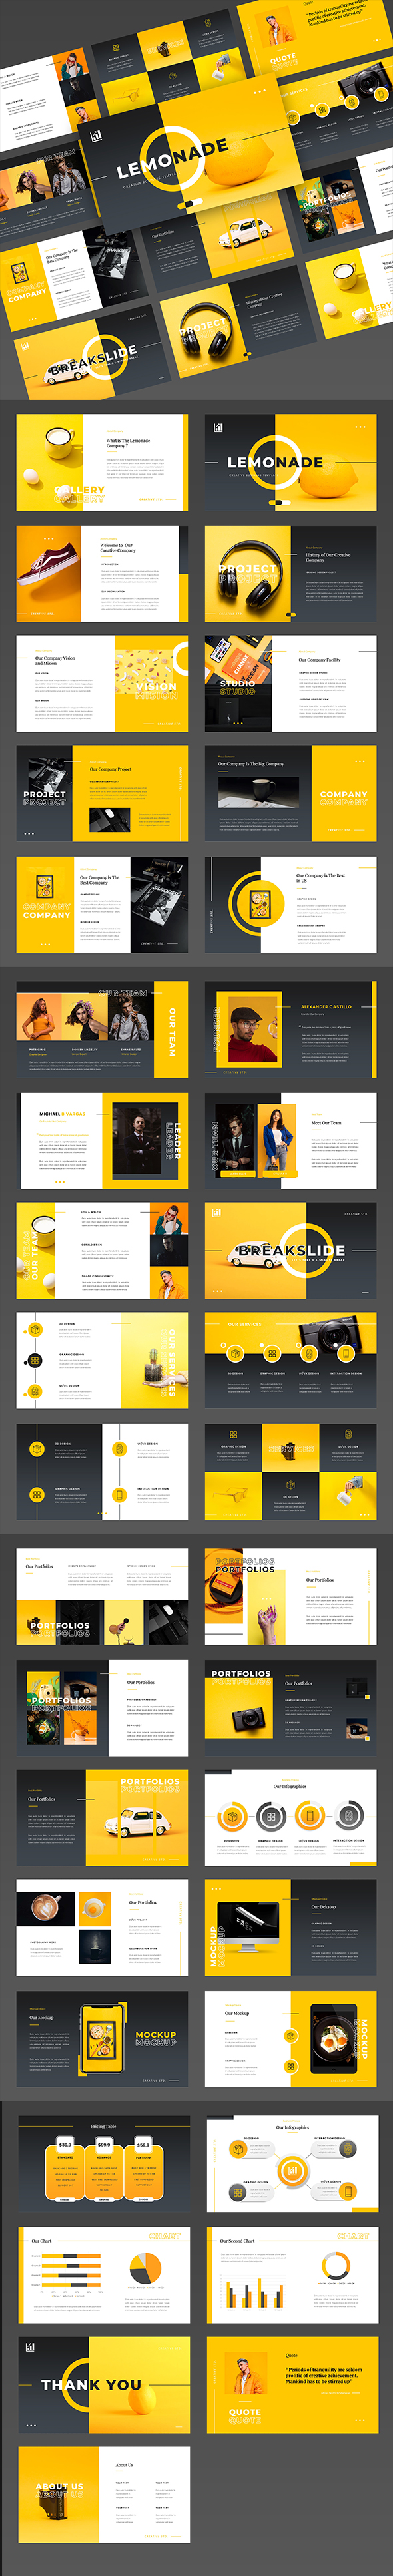 Flavo – Creative Business PowerPoint Template